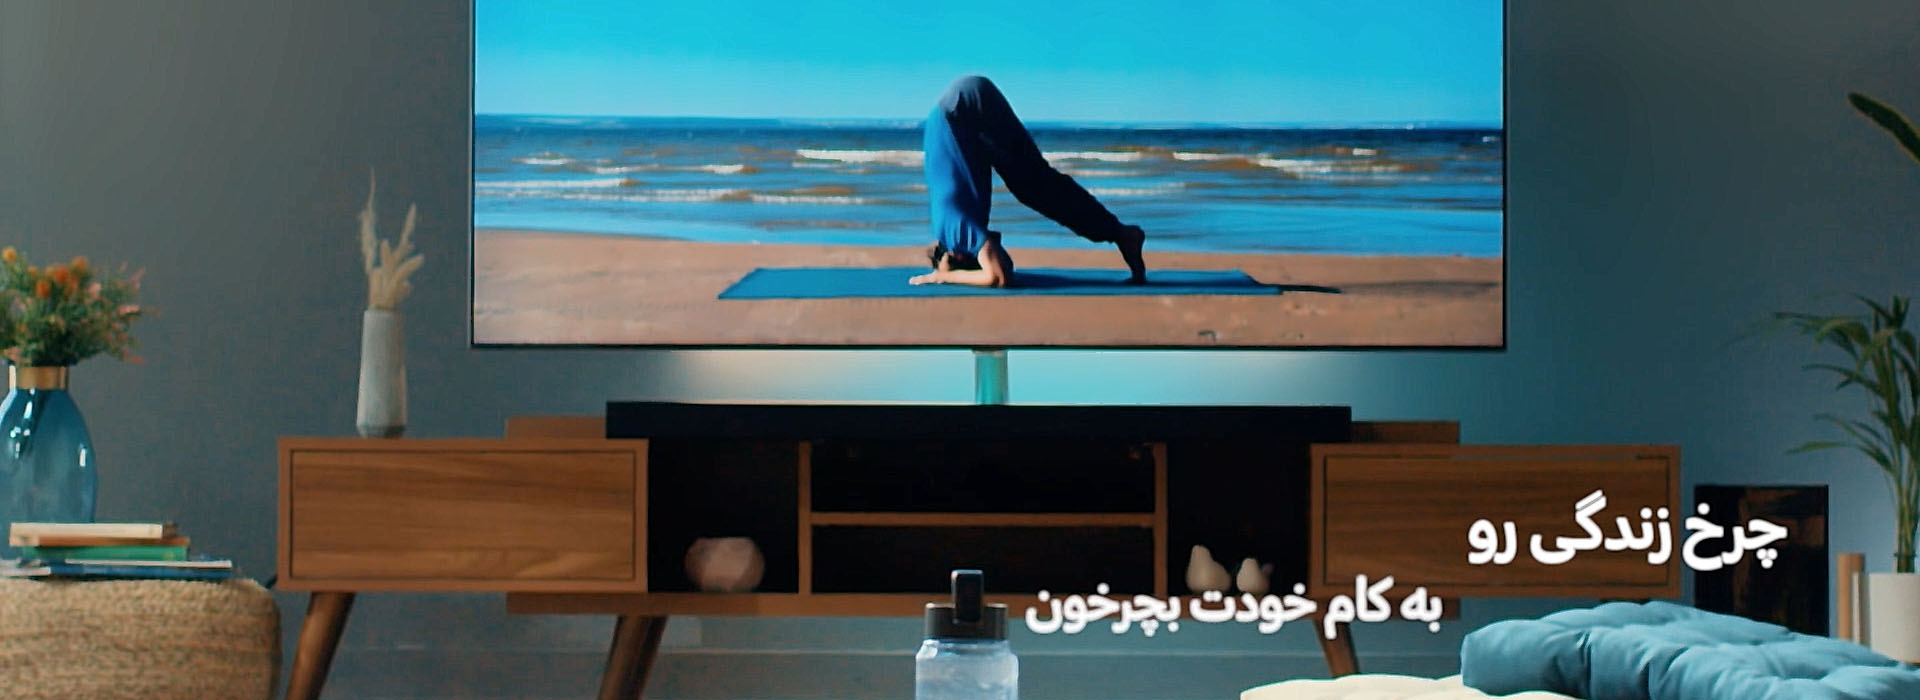 A Samsung TV monitor on which a yogi is doing a handstand